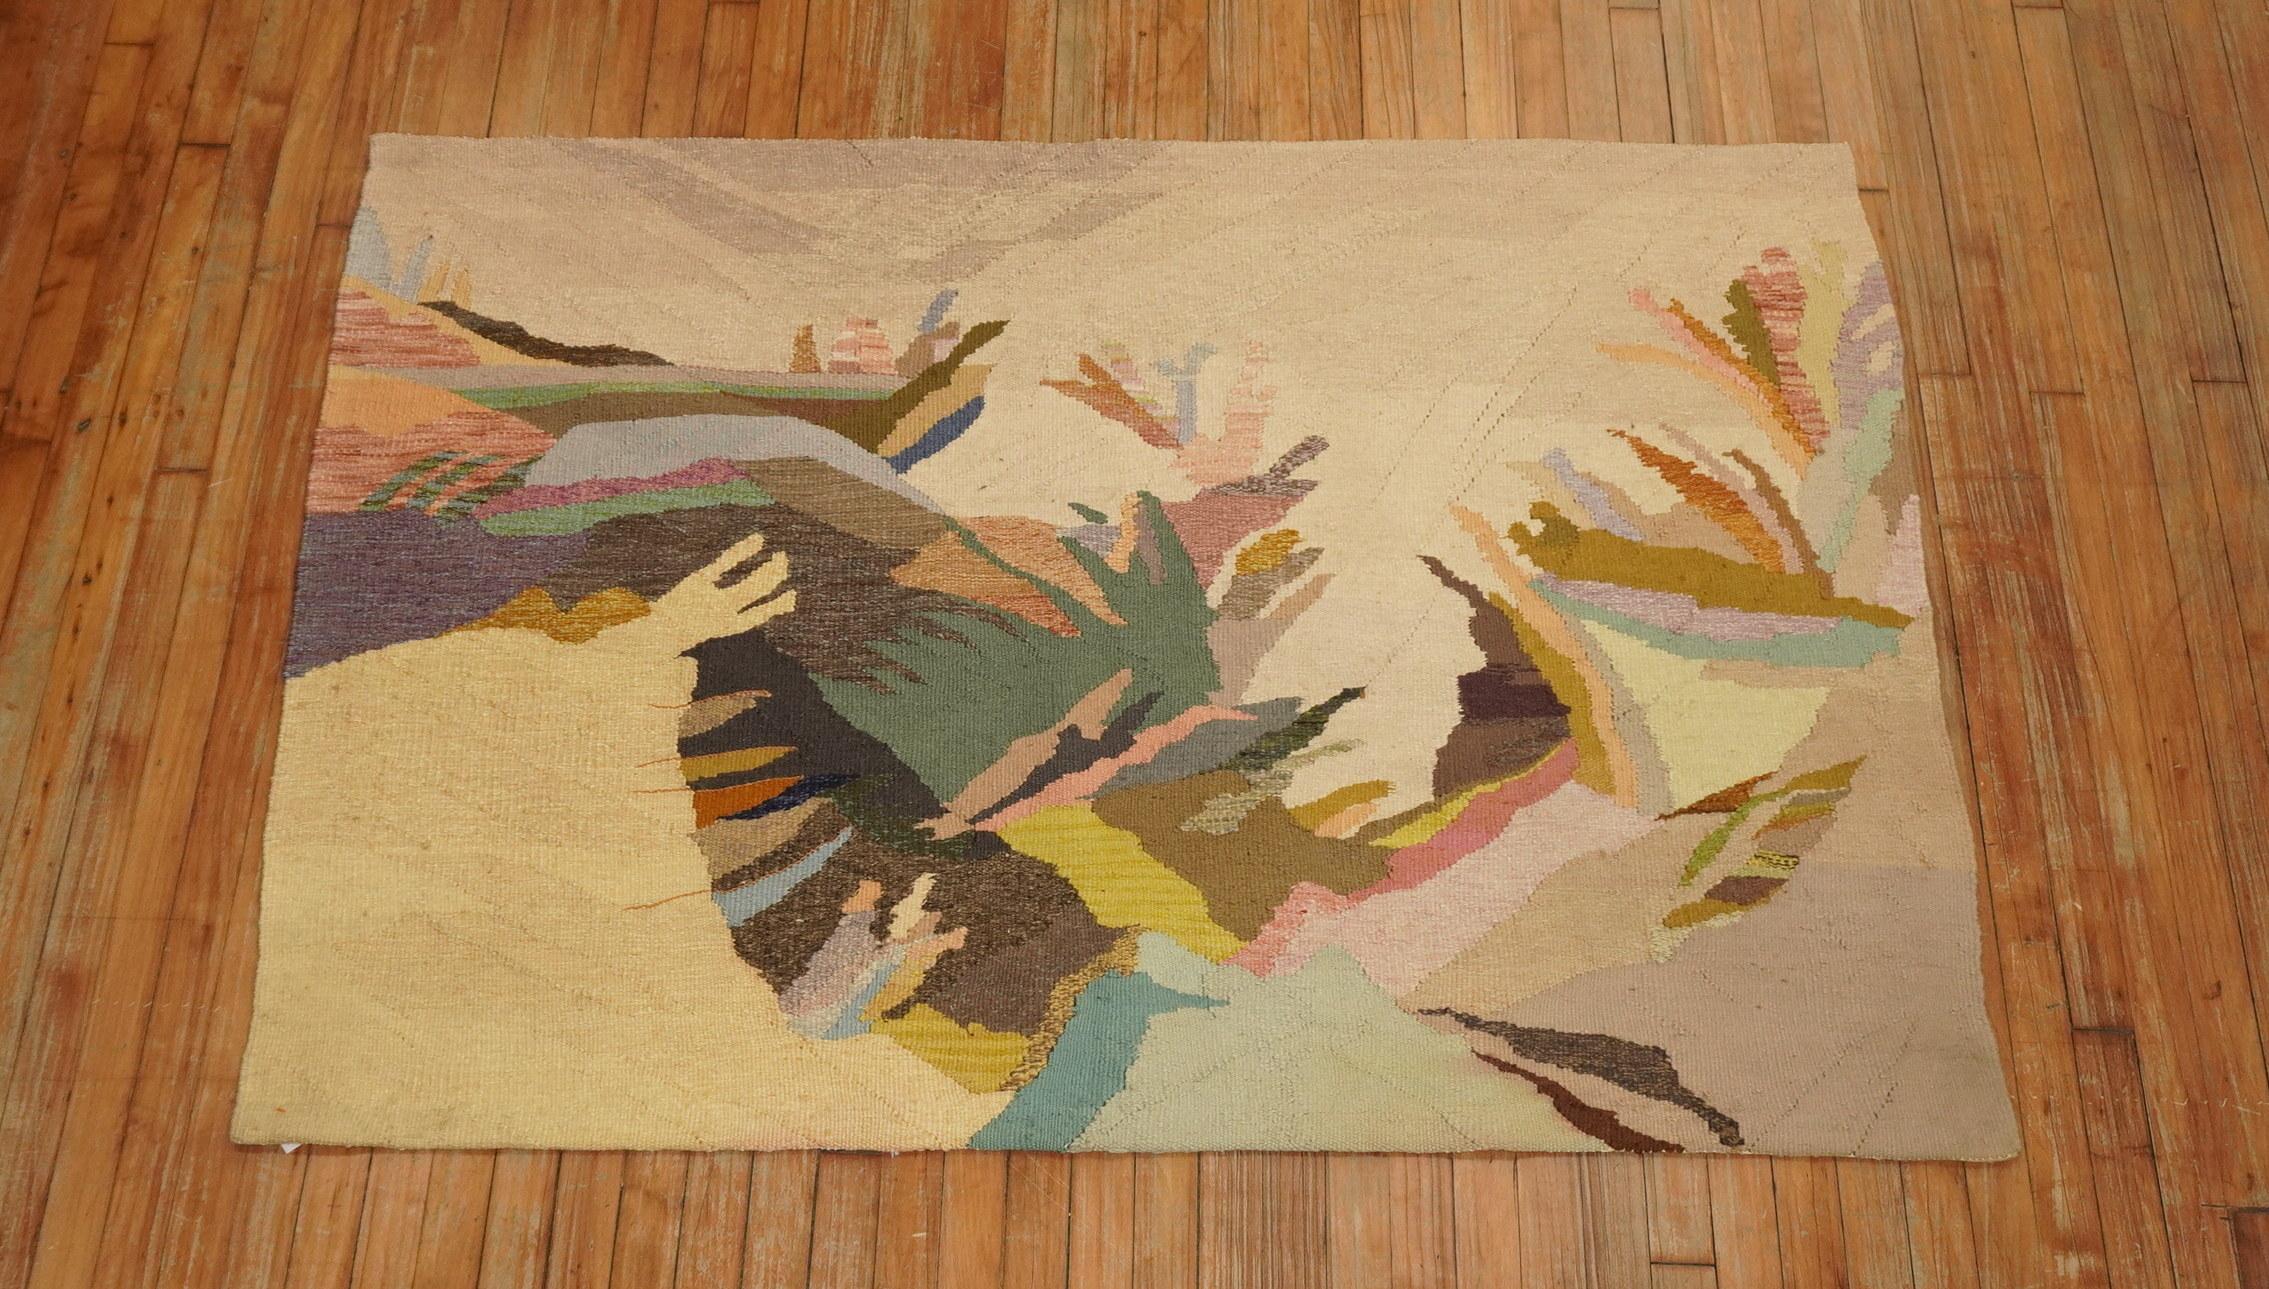 A late 20th century one of a kind North American Kilim with a landscape scenery motif in warm colors. 

Measures: 3'10” x 5'6” dated 1986 name of weavers are sewn on the back of the rug.